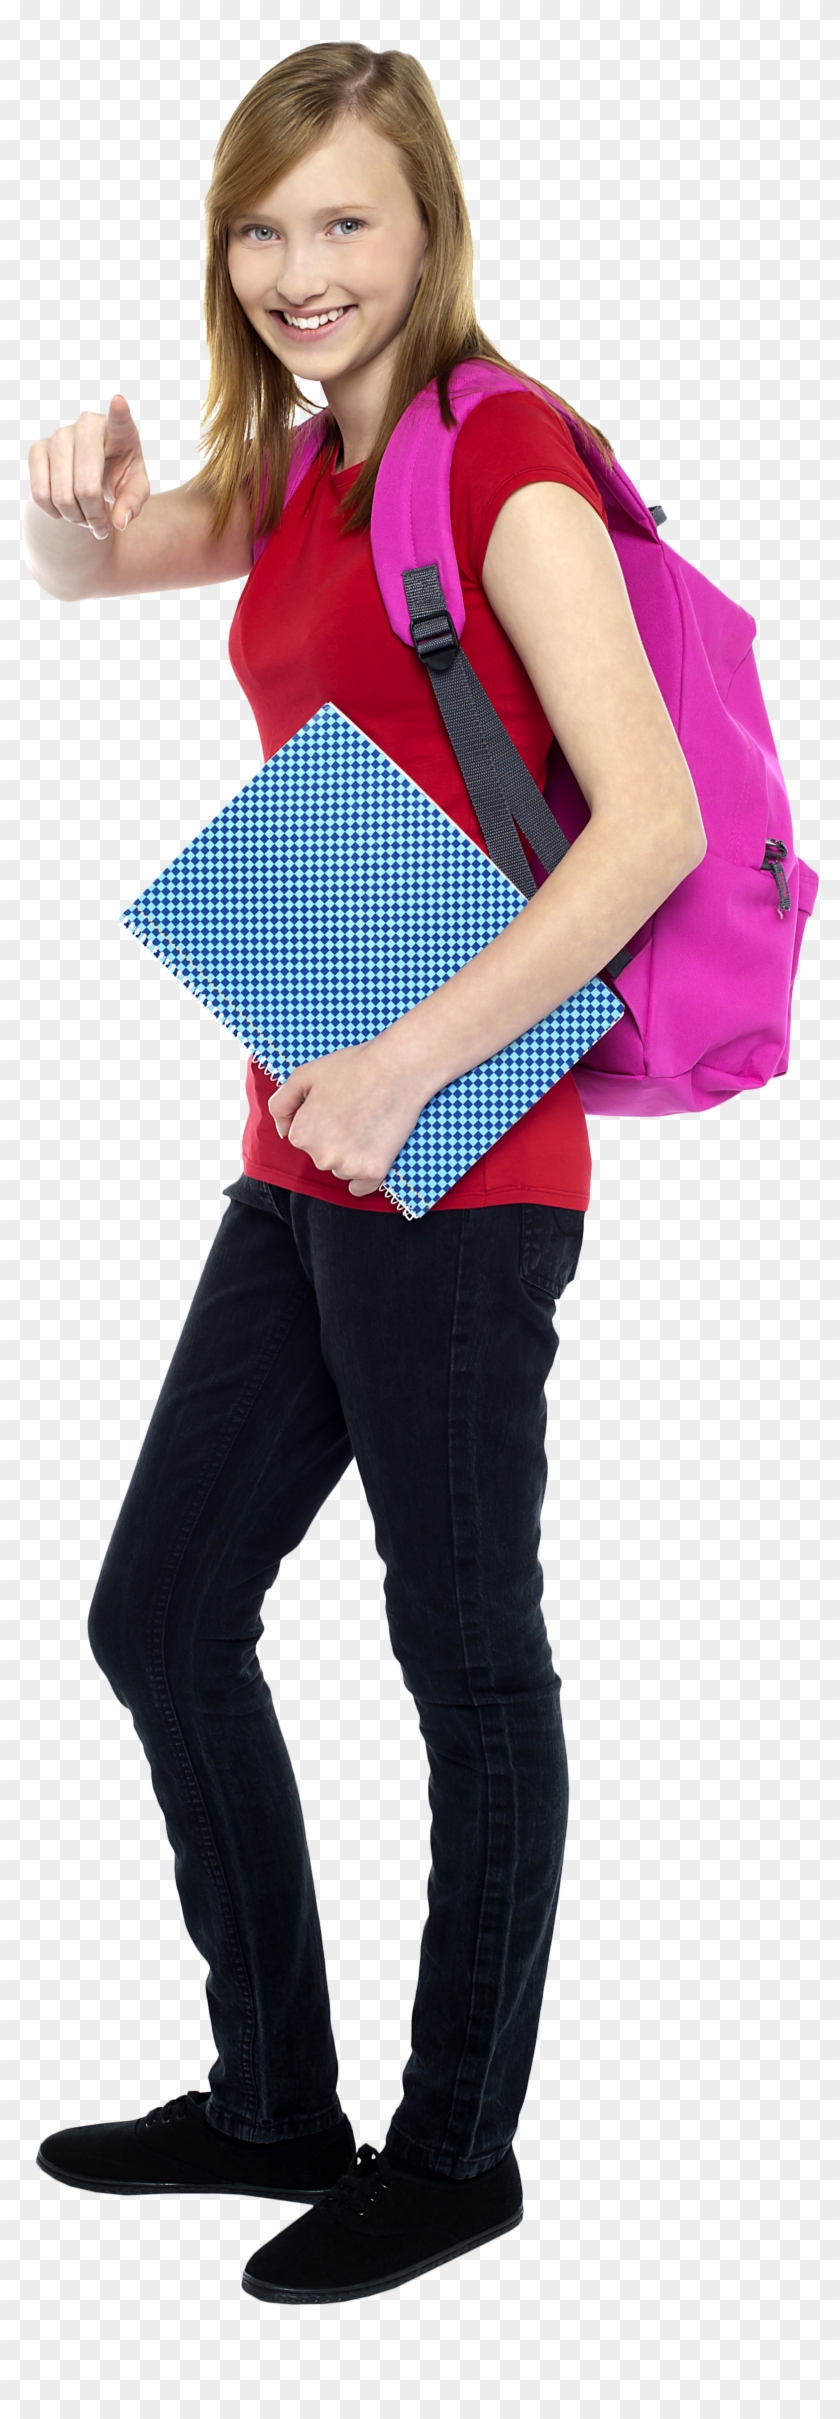 Woman Student Free Commercial Use Png Images - College Girl Hd Png Clipart #1657908